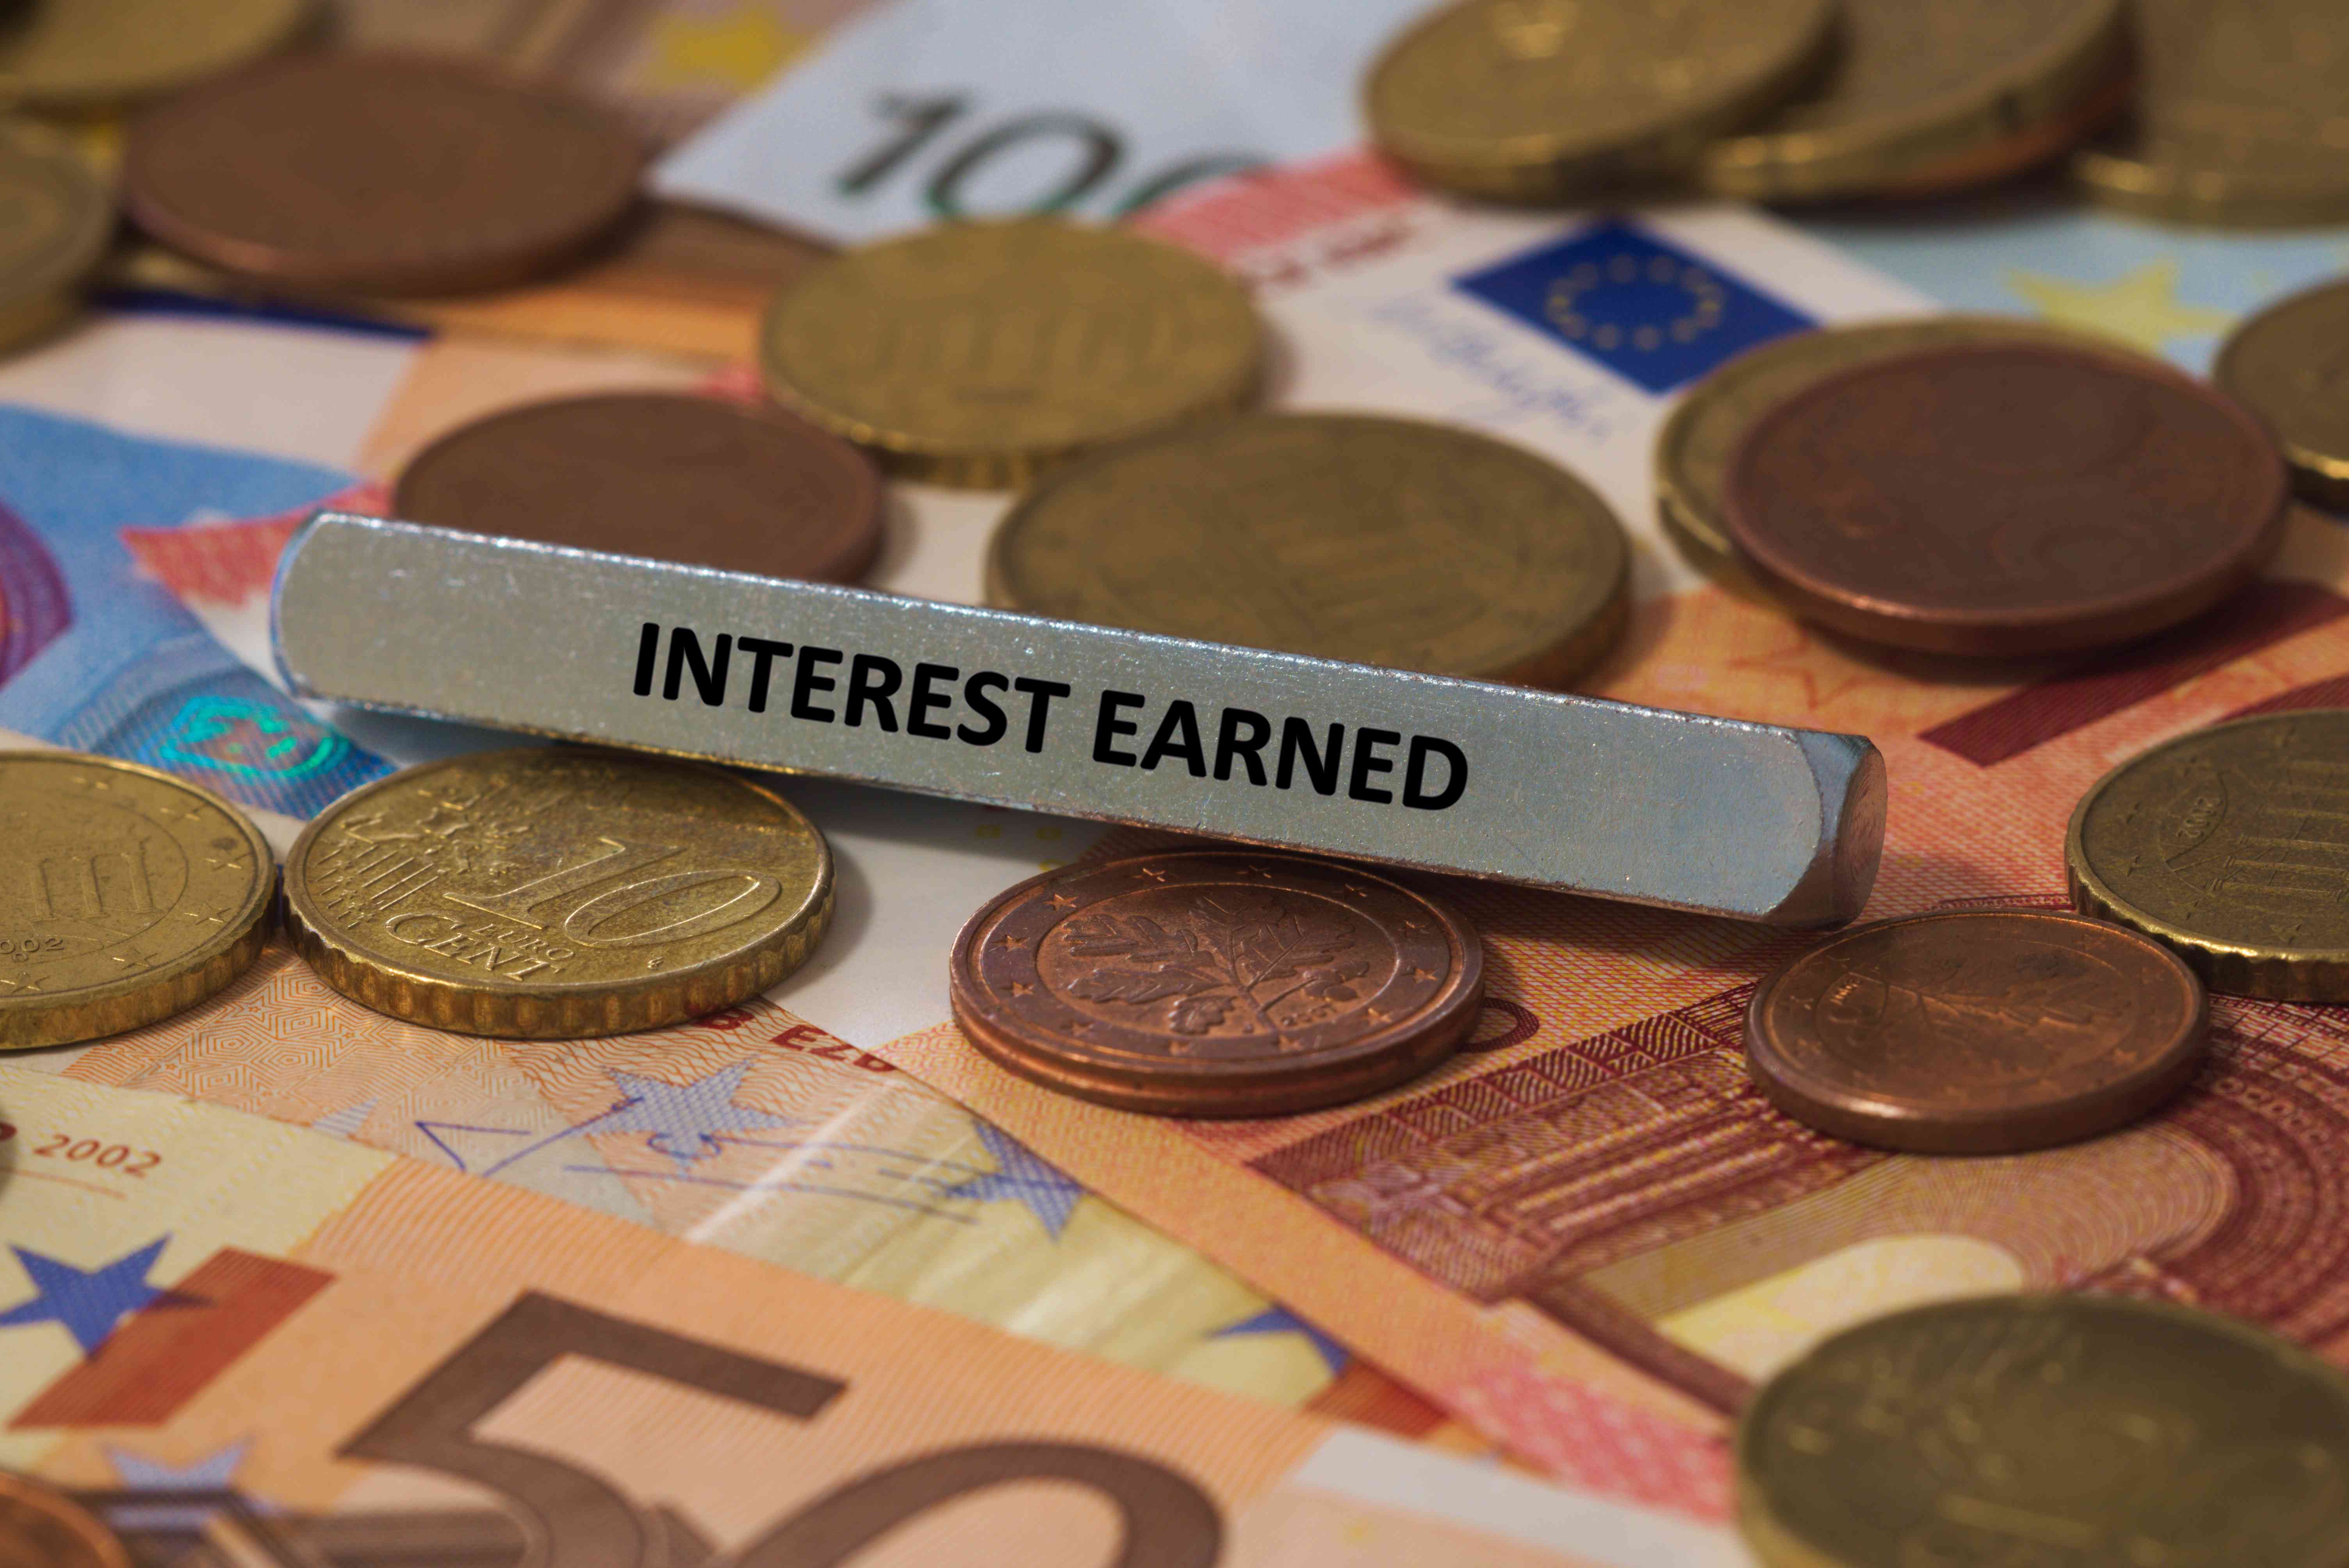 interest earned - the word was printed on a metal bar. the metal bar was placed on several banknotes